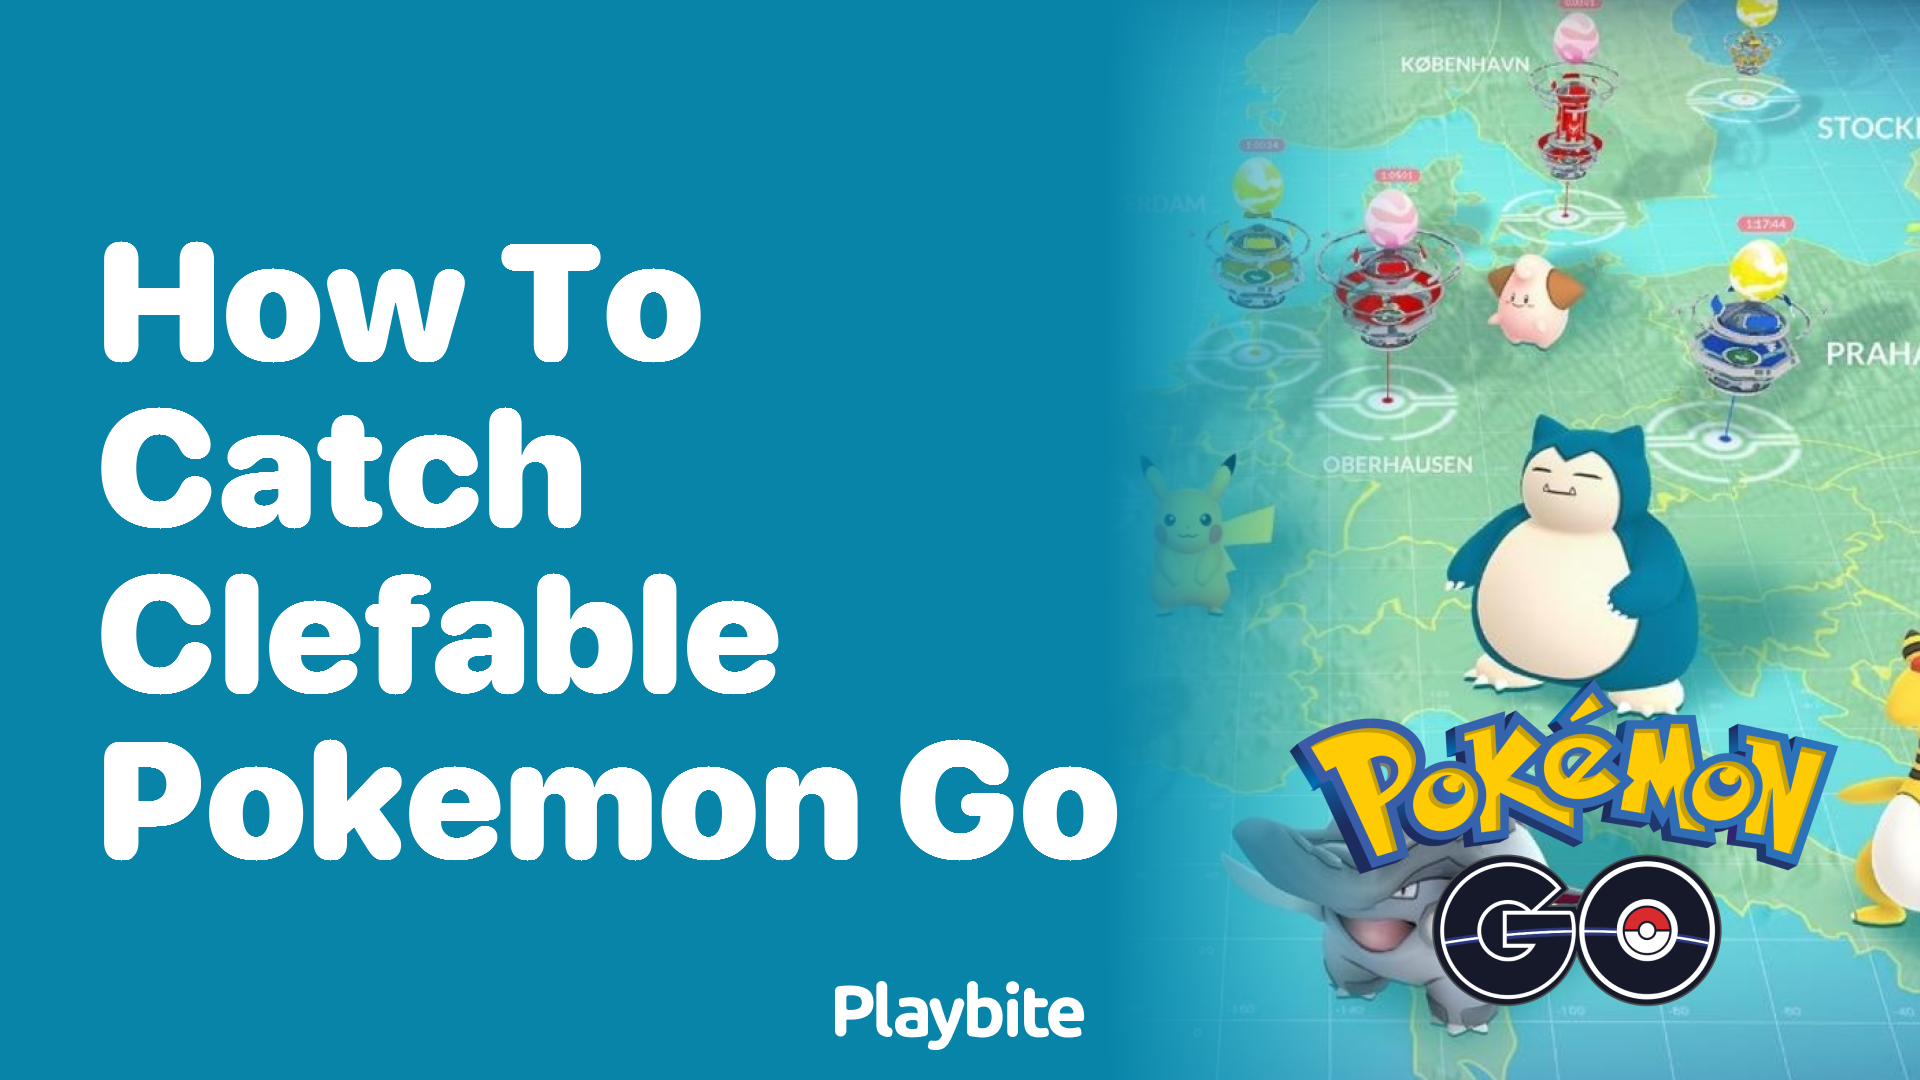 How to Catch Clefable in Pokemon GO